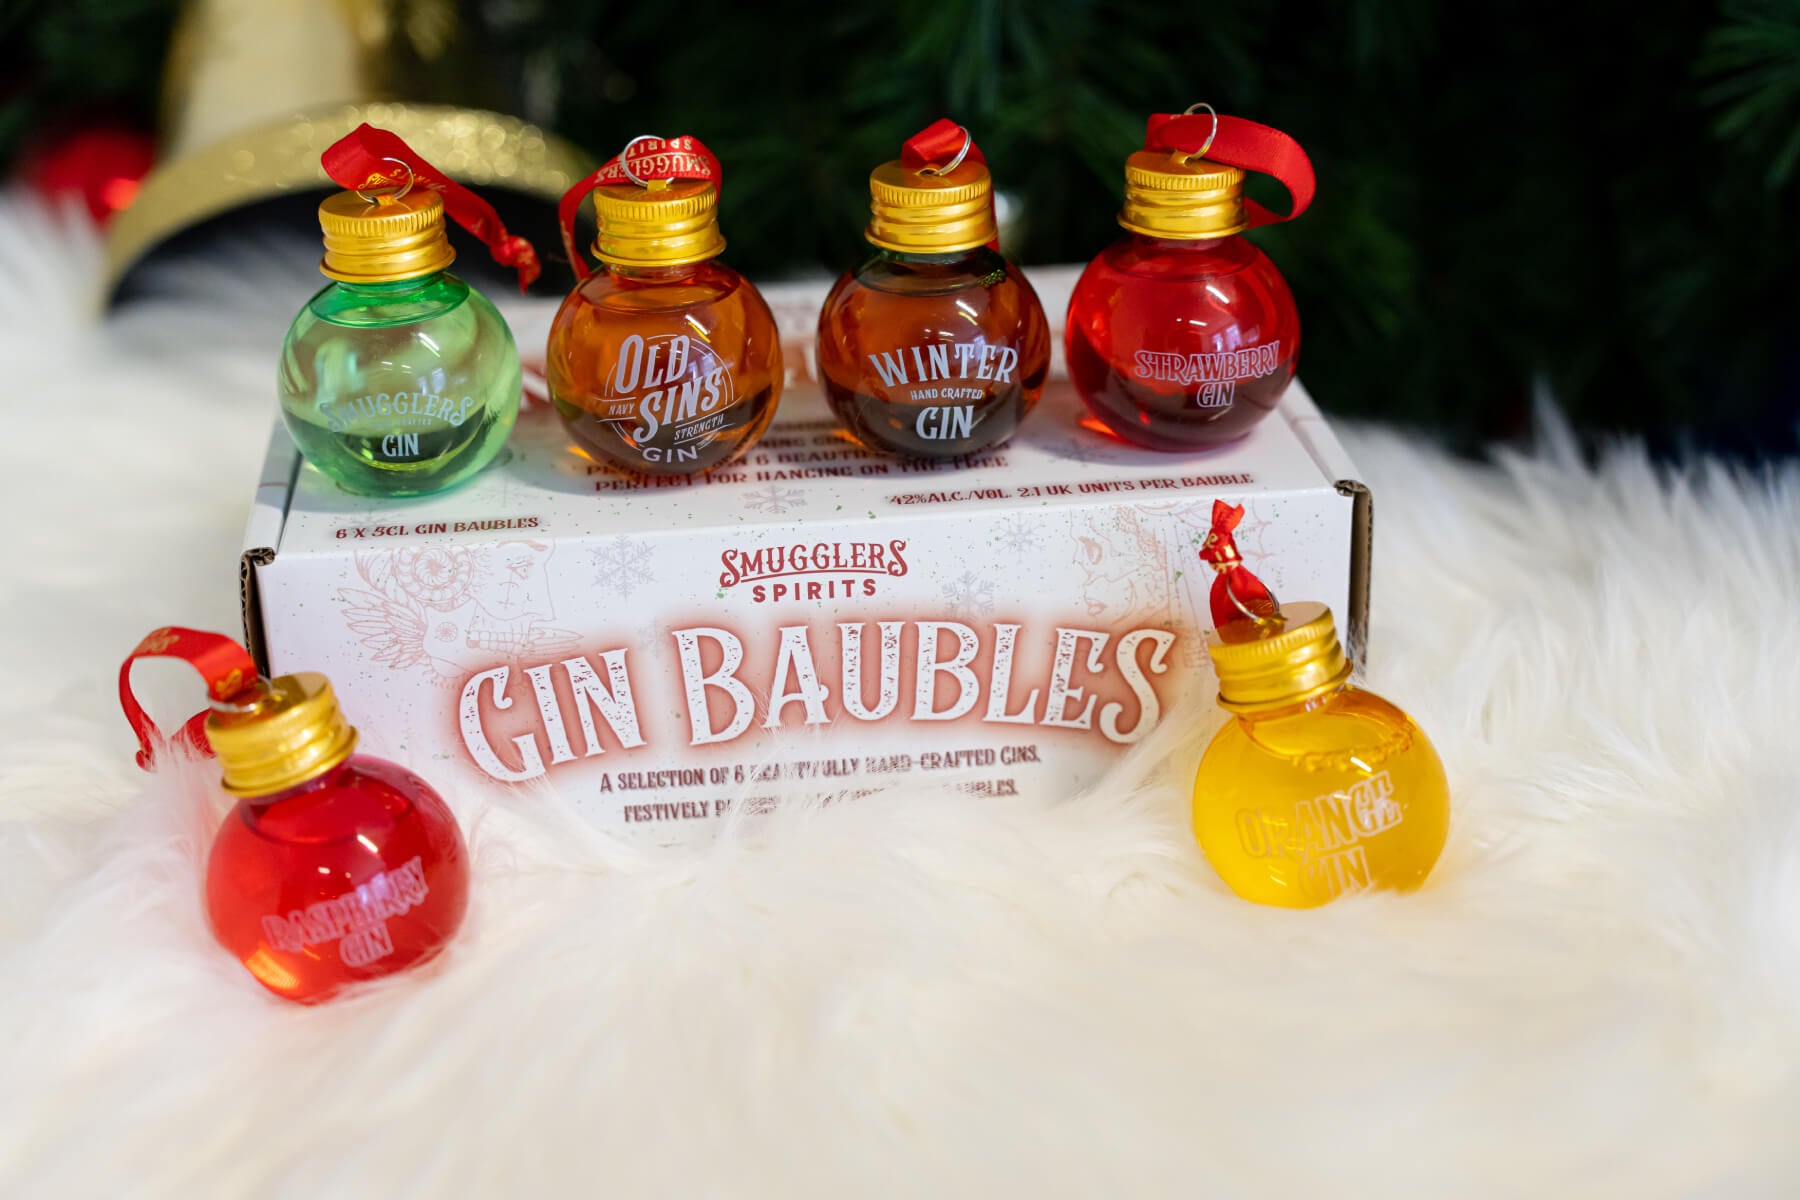 Gin baubles and box